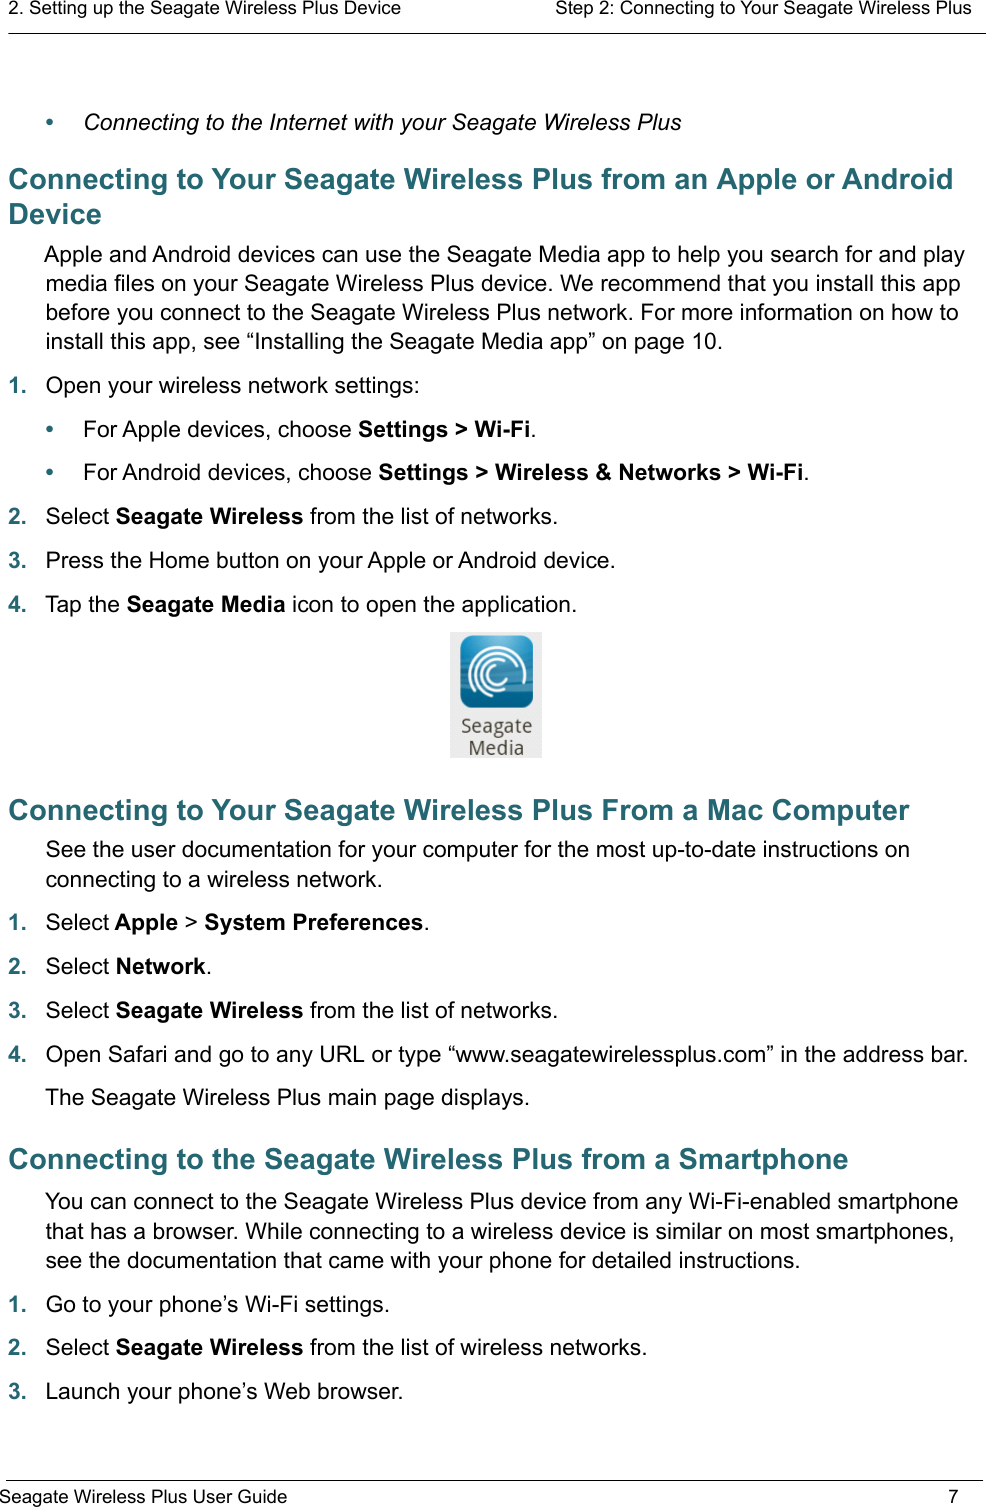 2. Setting up the Seagate Wireless Plus Device  Step 2: Connecting to Your Seagate Wireless PlusSeagate Wireless Plus User Guide 7•Connecting to the Internet with your Seagate Wireless PlusConnecting to Your Seagate Wireless Plus from an Apple or Android DeviceApple and Android devices can use the Seagate Media app to help you search for and play media files on your Seagate Wireless Plus device. We recommend that you install this app before you connect to the Seagate Wireless Plus network. For more information on how to install this app, see “Installing the Seagate Media app” on page 10.1. Open your wireless network settings:•For Apple devices, choose Settings &gt; Wi-Fi.•For Android devices, choose Settings &gt; Wireless &amp; Networks &gt; Wi-Fi.2. Select Seagate Wireless from the list of networks.3. Press the Home button on your Apple or Android device.4. Tap the Seagate Media icon to open the application.Connecting to Your Seagate Wireless Plus From a Mac ComputerSee the user documentation for your computer for the most up-to-date instructions on connecting to a wireless network.1. Select Apple &gt; System Preferences.2. Select Network.3. Select Seagate Wireless from the list of networks.4. Open Safari and go to any URL or type “www.seagatewirelessplus.com” in the address bar.The Seagate Wireless Plus main page displays.Connecting to the Seagate Wireless Plus from a SmartphoneYou can connect to the Seagate Wireless Plus device from any Wi-Fi-enabled smartphone that has a browser. While connecting to a wireless device is similar on most smartphones, see the documentation that came with your phone for detailed instructions.1. Go to your phone’s Wi-Fi settings.2. Select Seagate Wireless from the list of wireless networks.3. Launch your phone’s Web browser.